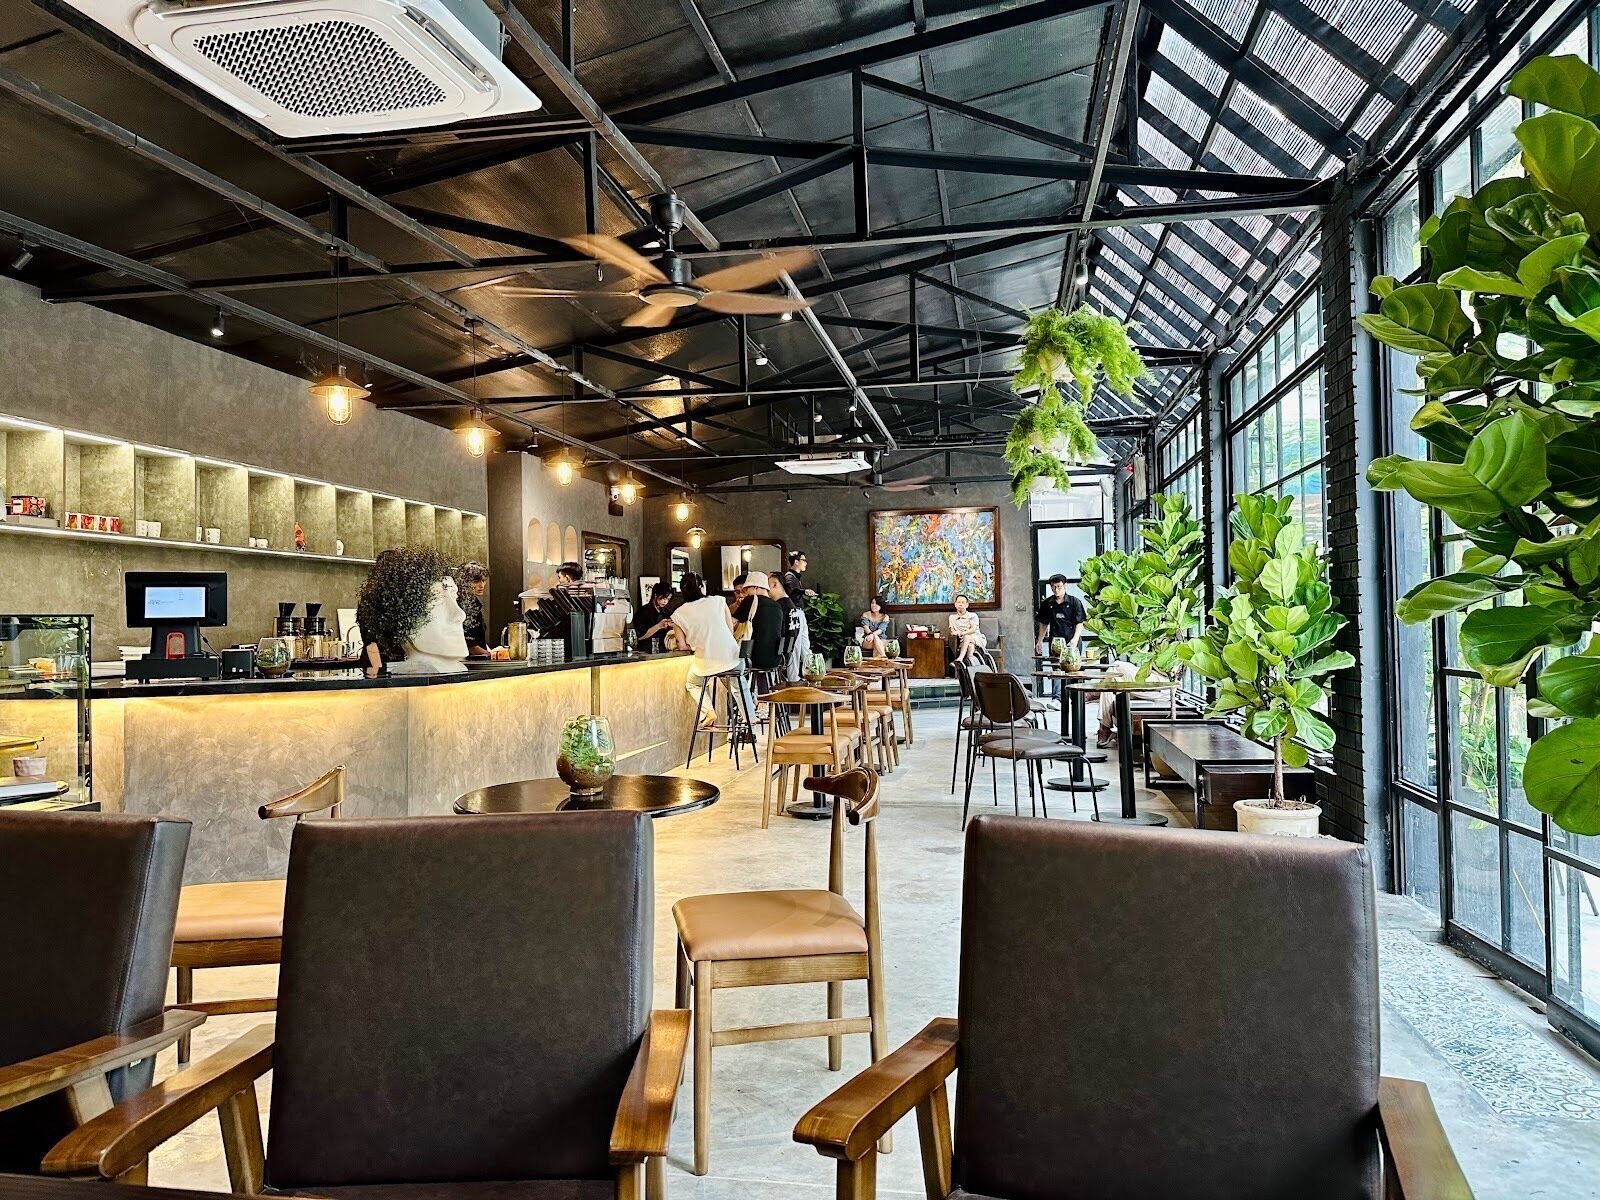 <span class="translation_missing" title="translation missing: en.meta.location_title, location_name: Bean There Specialty Coffee, city: Hanoi">Location Title</span>